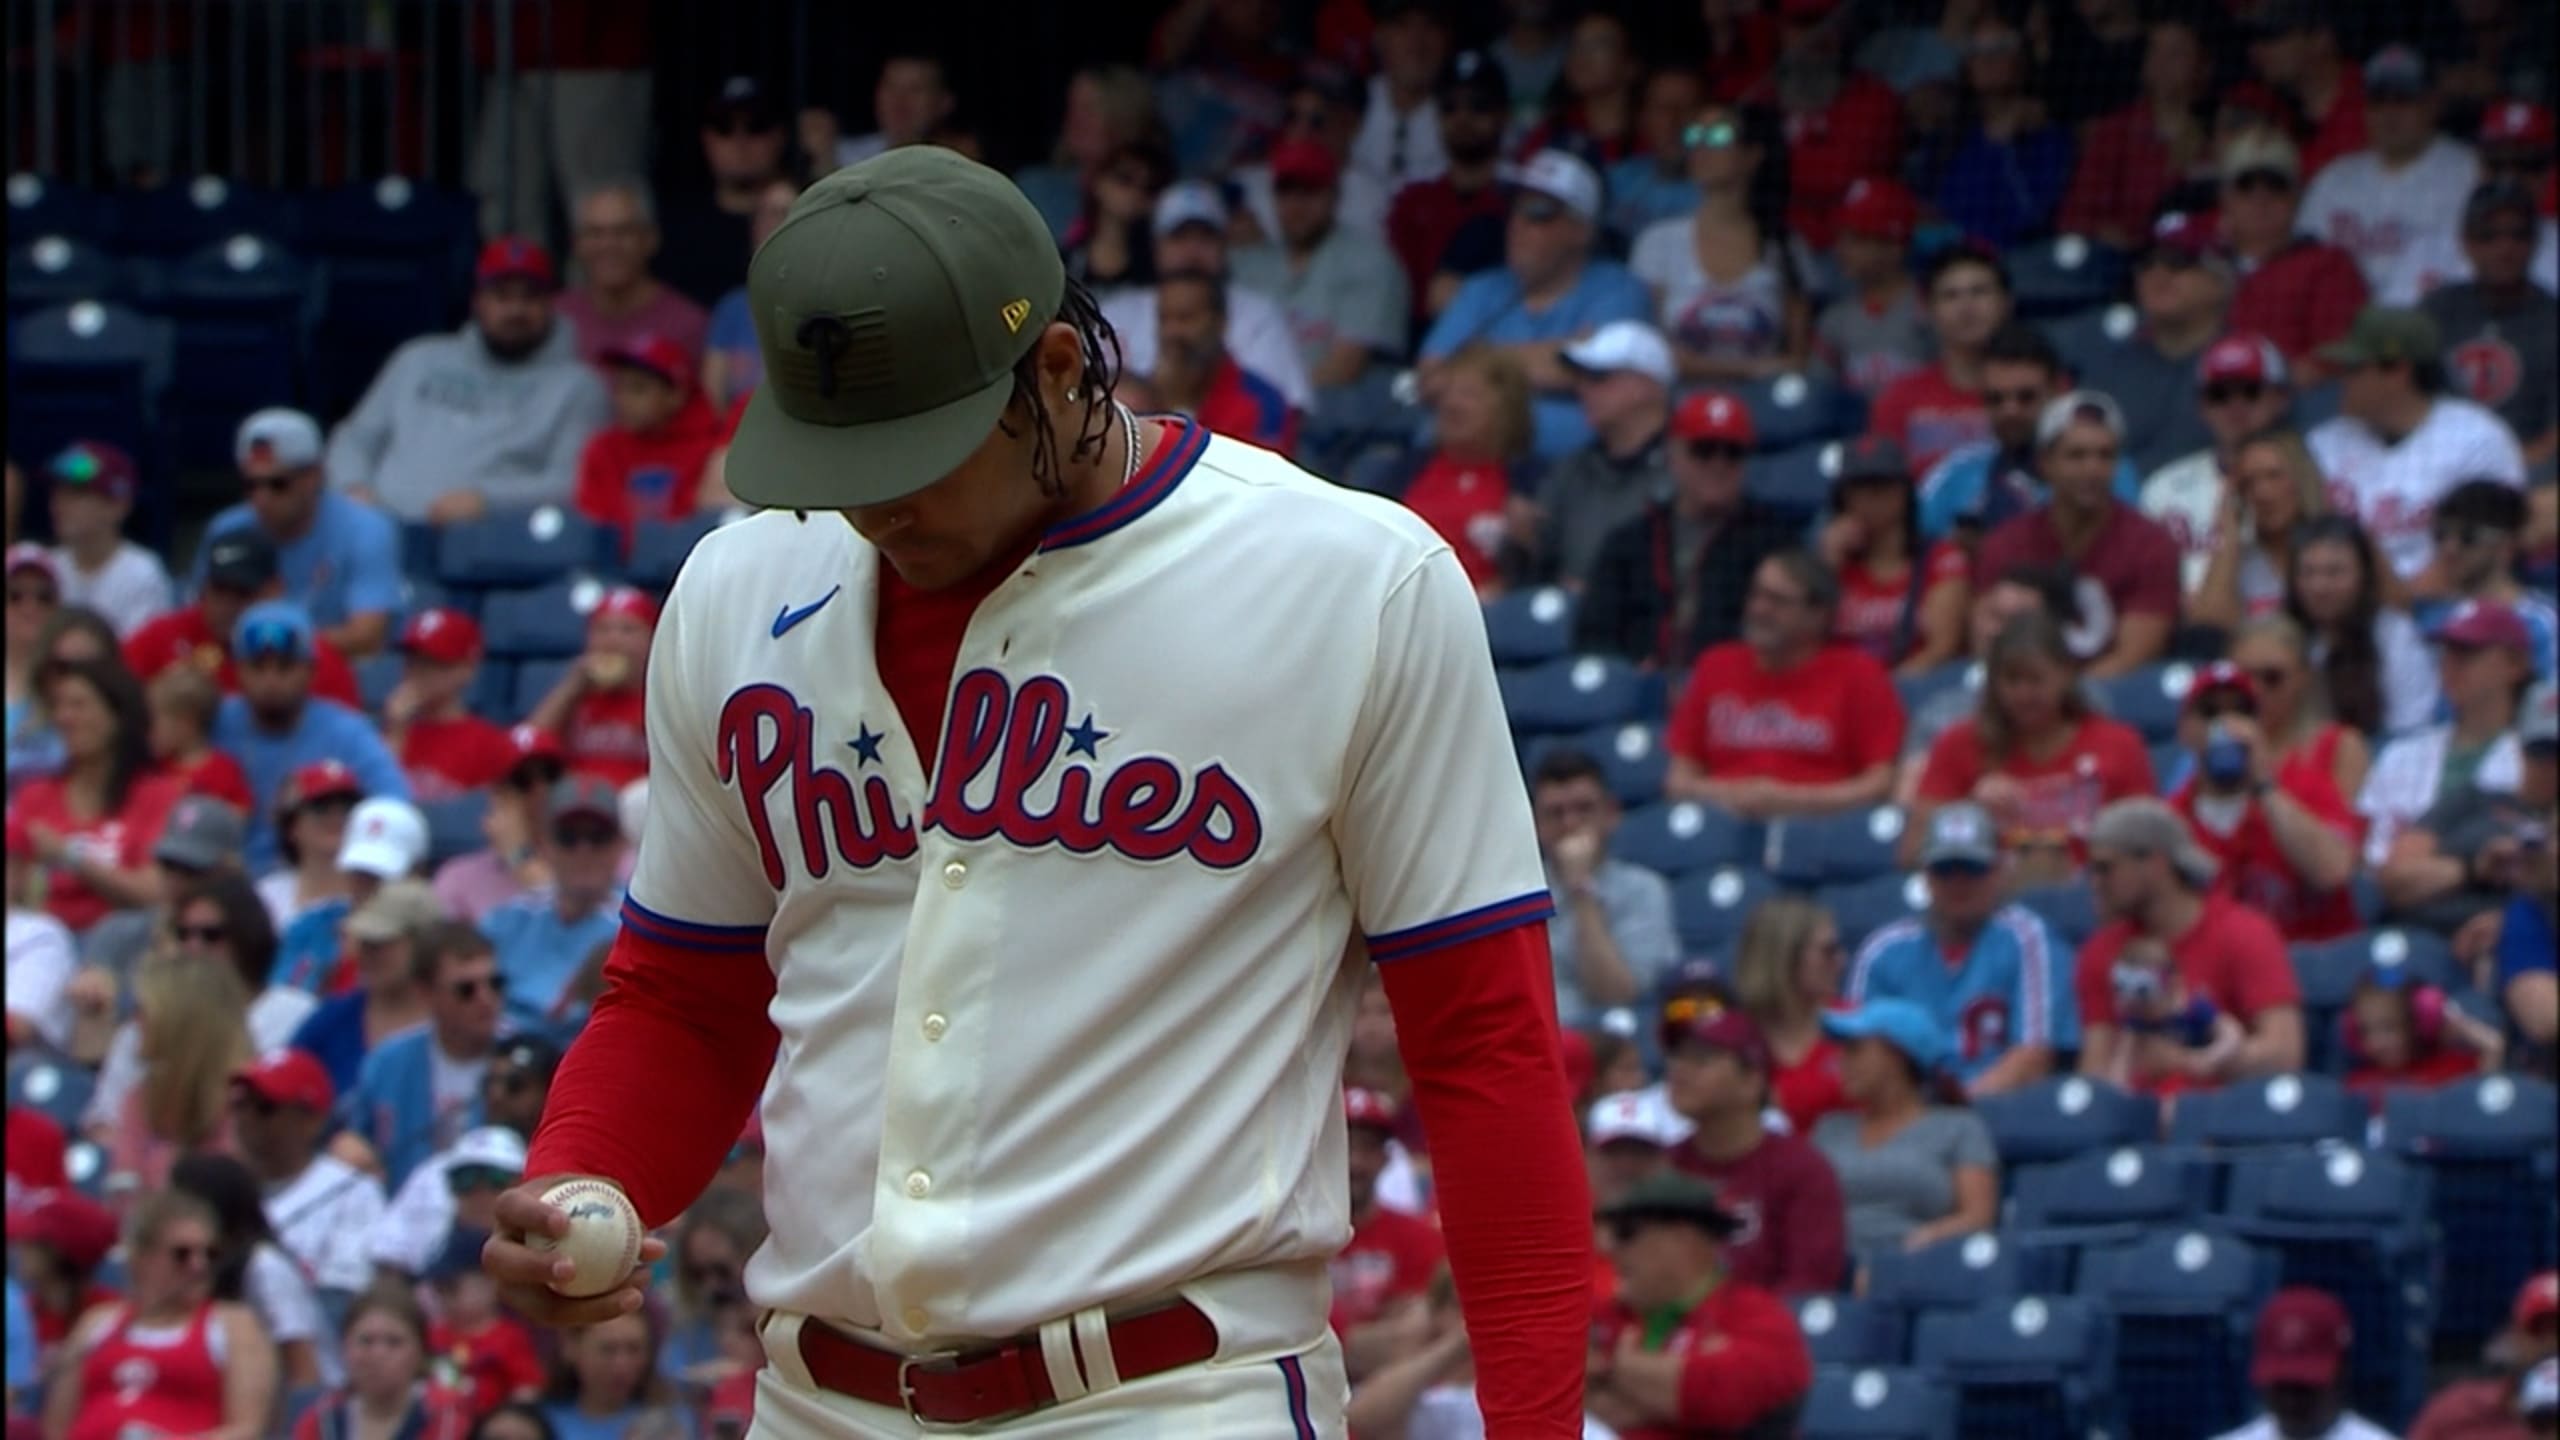 Phillies make Turner signing official, reveal jersey number - CBS